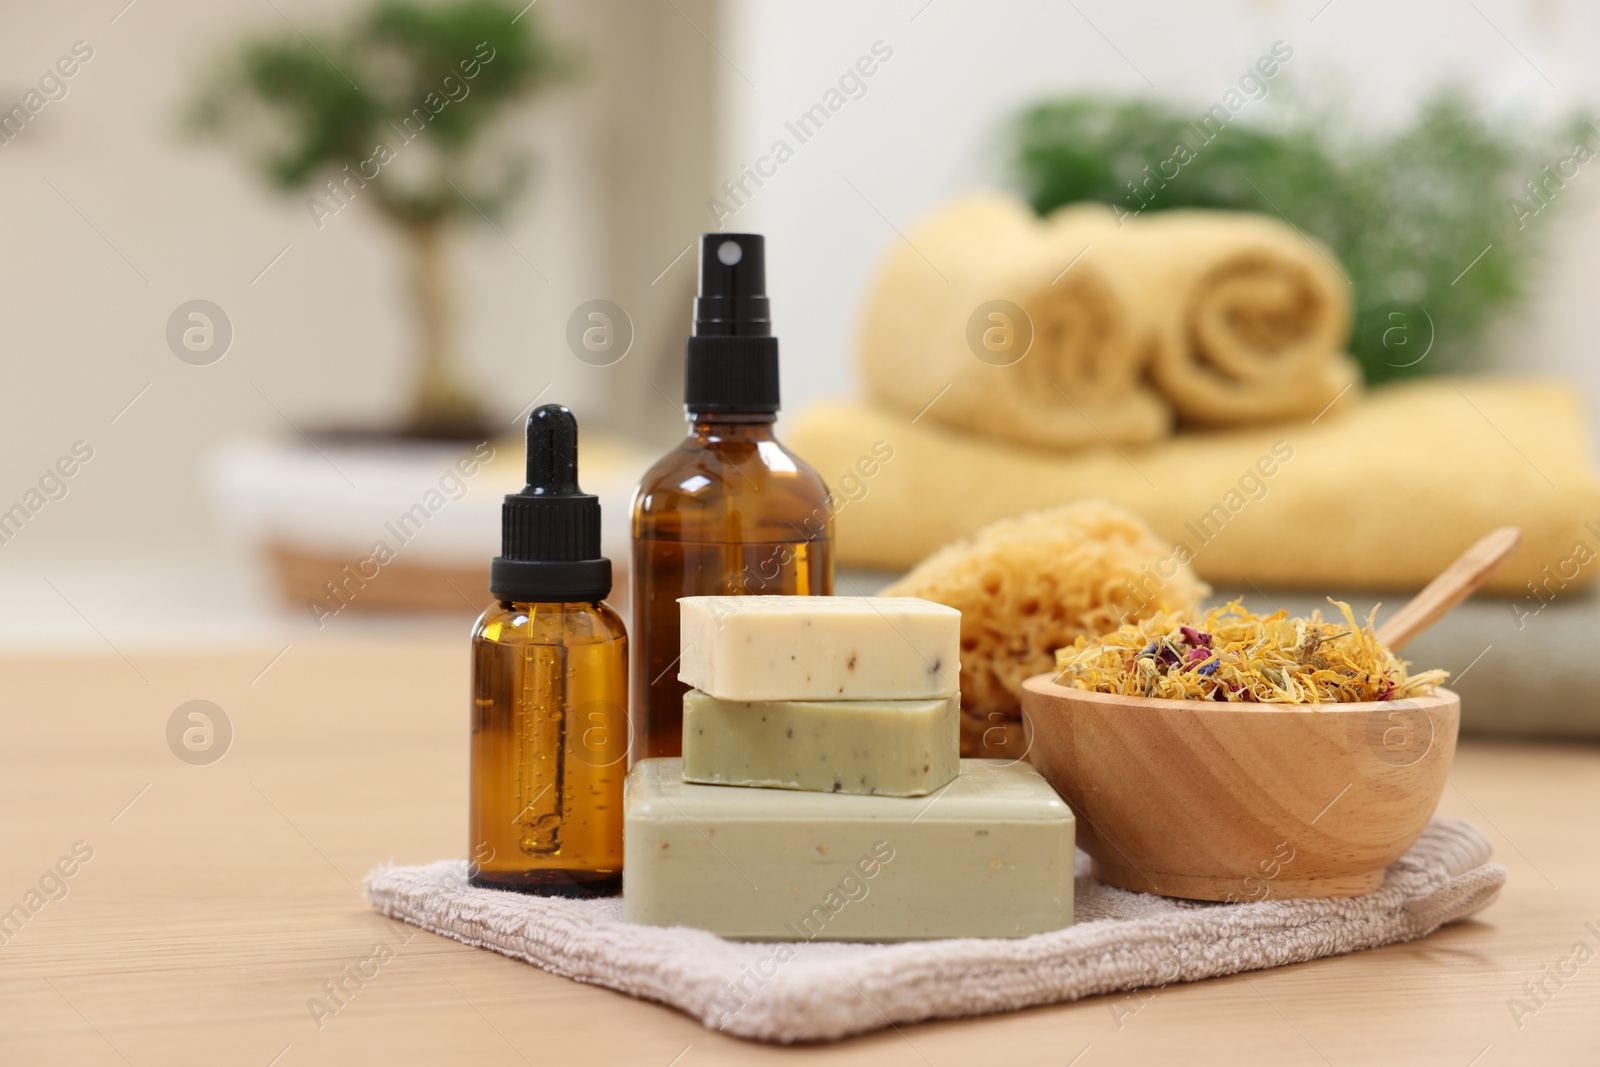 Photo of Bottles of essential oils, bowl with dry flowers, soap bars and natural sponge on light wooden table. Spa therapy